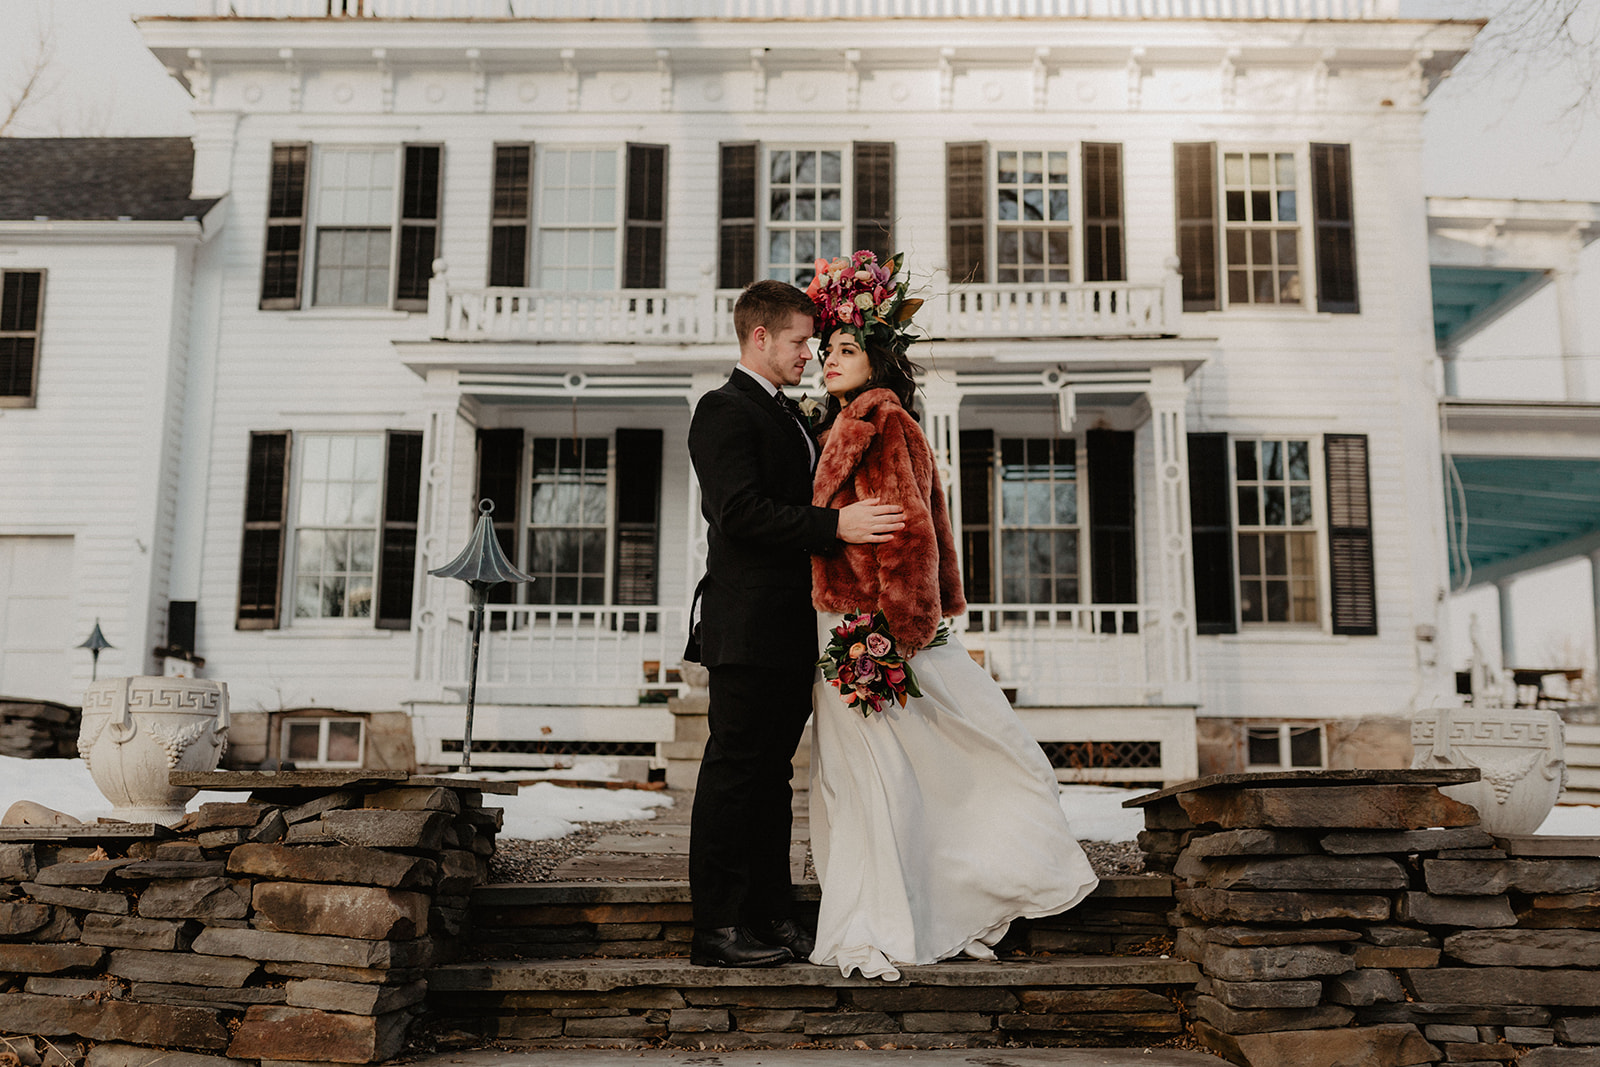 The 10 Most Intriguing Wedding Venues in Upstate New York 2020 | The Maples Estate | Verve Event Co.